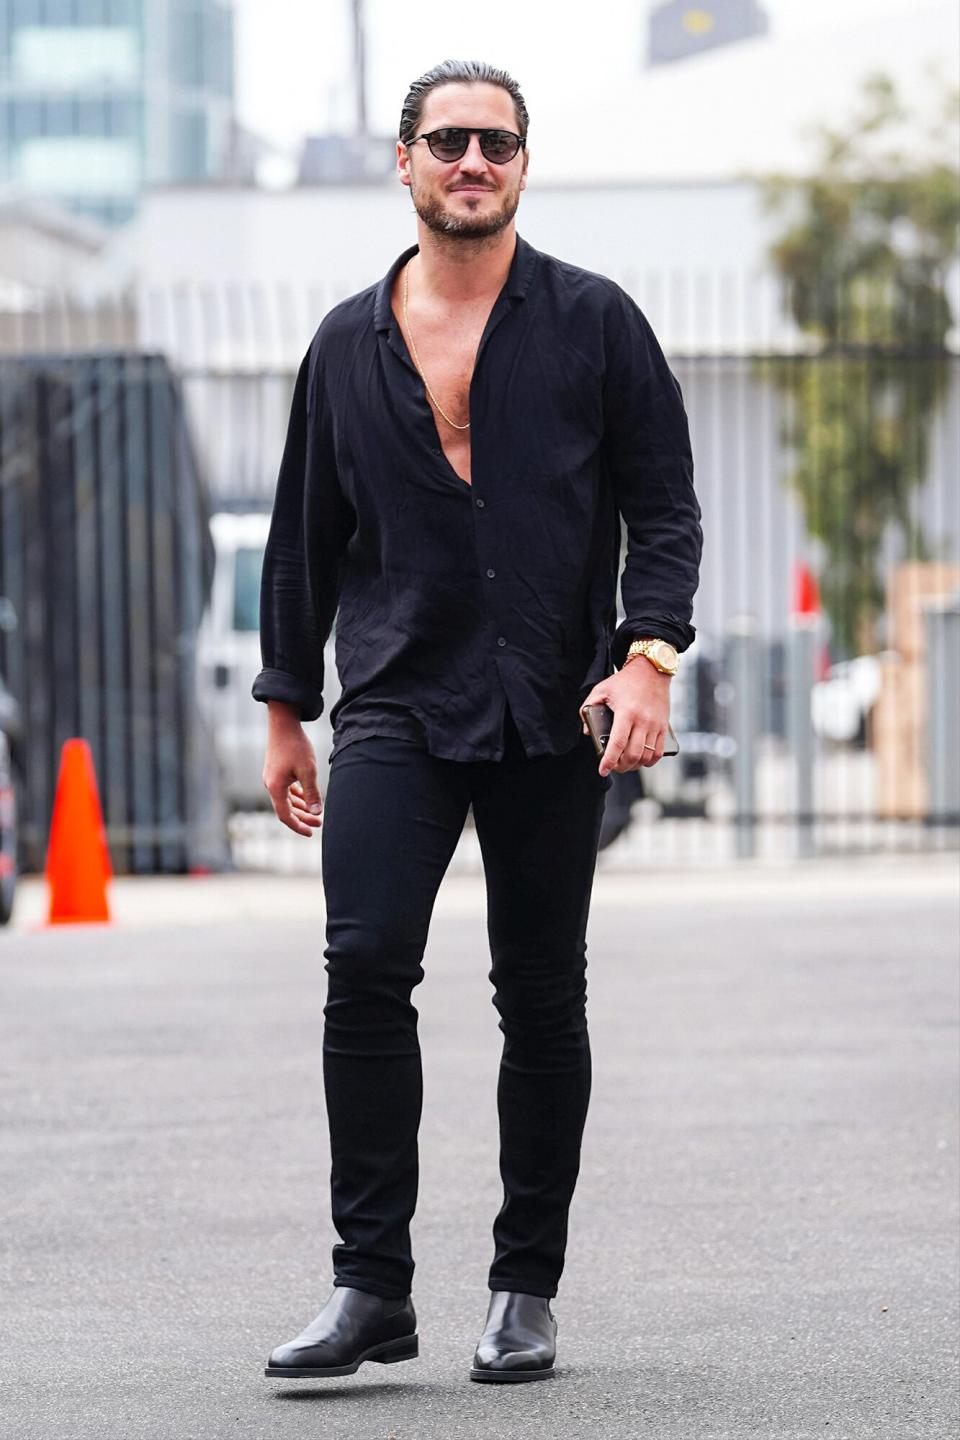 Val Chmerkovskiy at Dancing With The Stars Rehearsal Studio